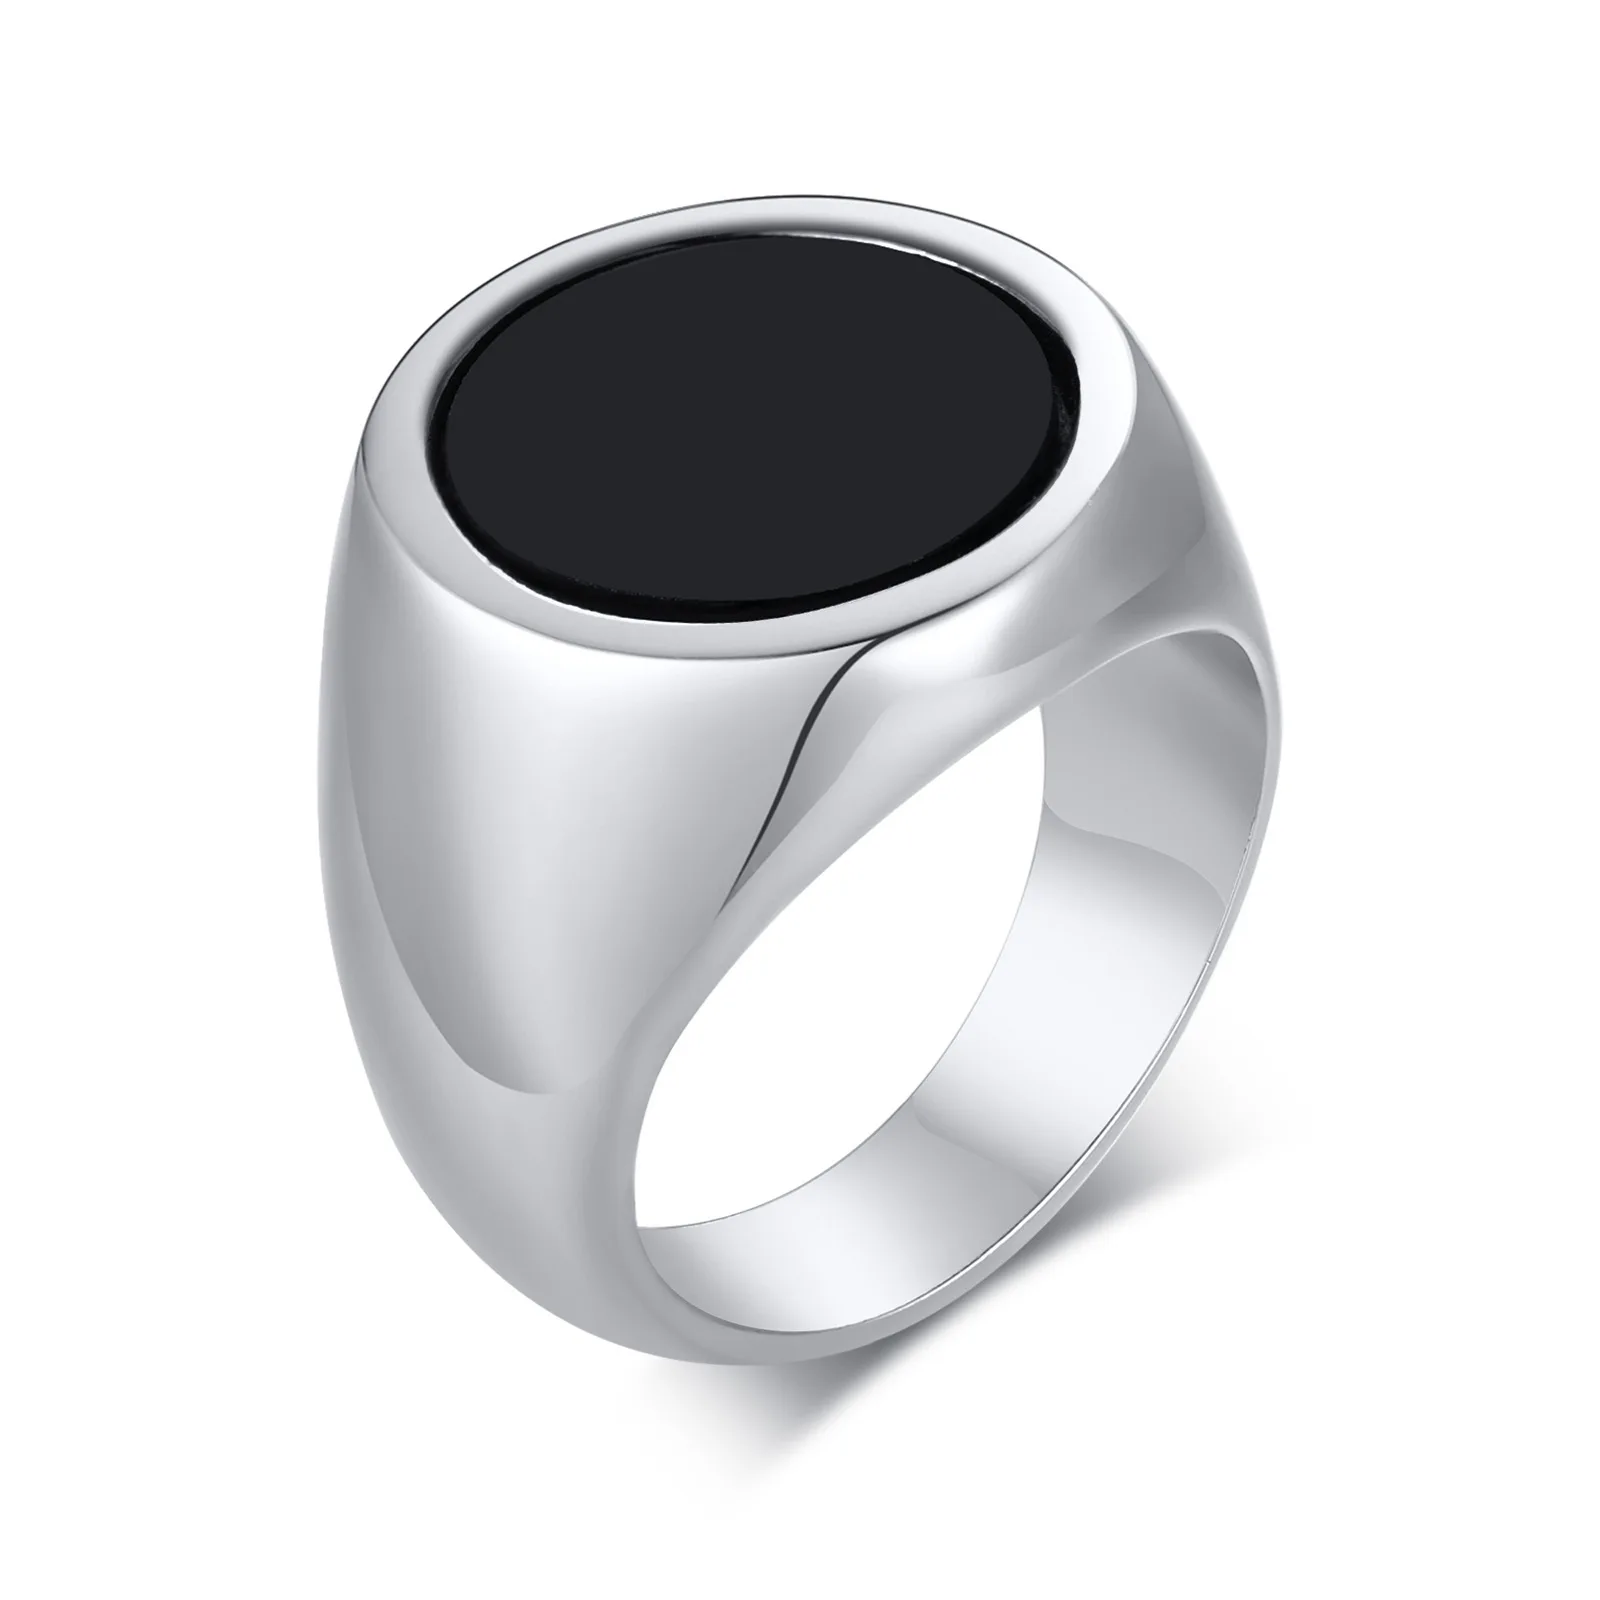 

DARHSEN Men Round Rings Black Design Silver Color Stainless Steel Fashion Anniversary Jewelry size 7 8 9 10 11 12